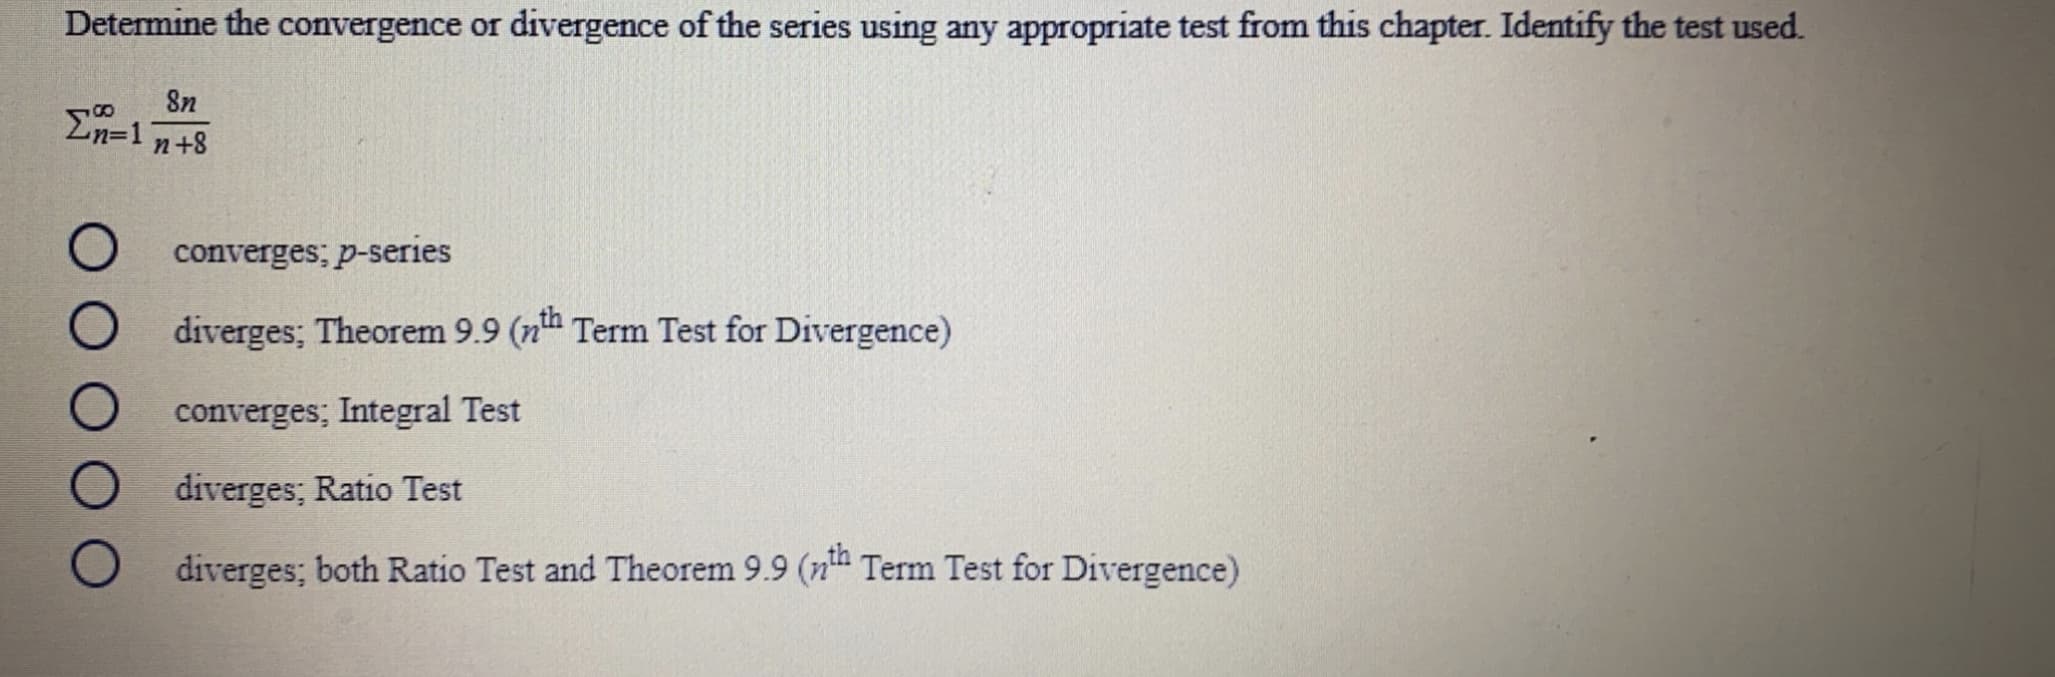 Determine the convergence or divergence of the series using any appropriate test from this chapter. Identify the test used.
8n
En=1
n+8
